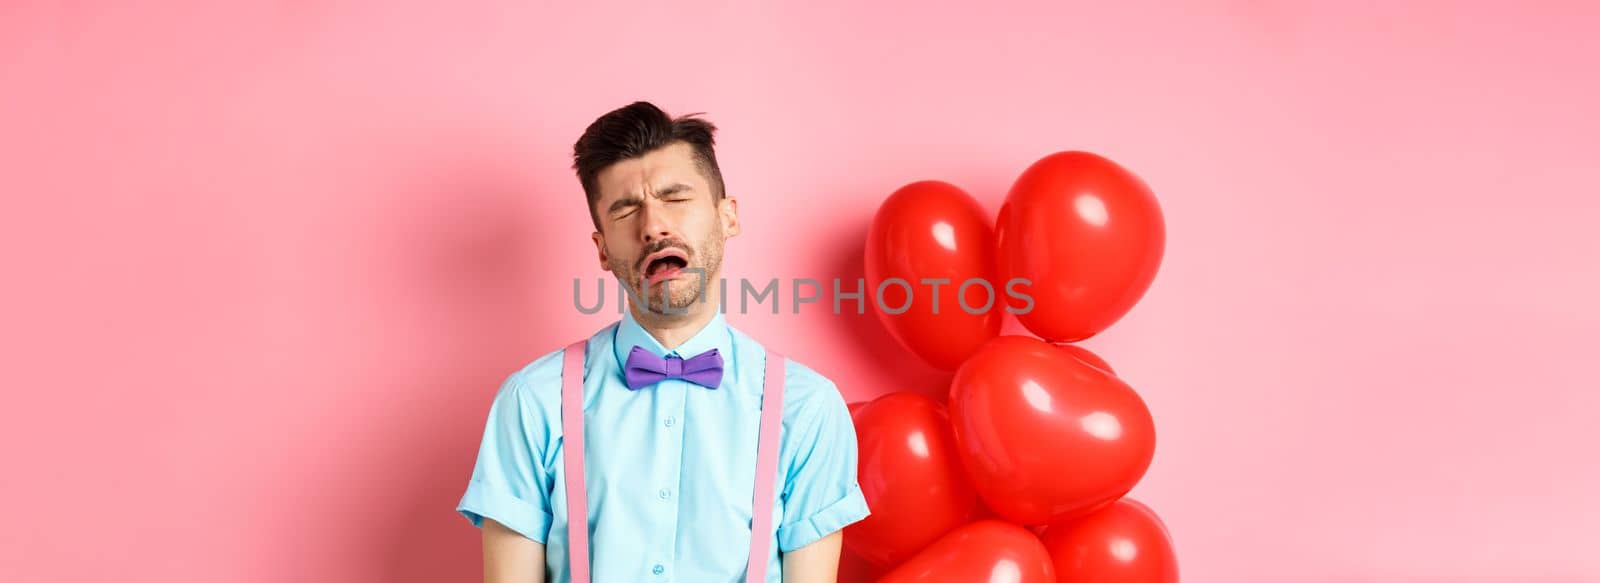 Valentines concept. Sad and heartbroken man crying over break-up, being cheated on lovers day, sobbing and feeling lonely, standing on pink background.